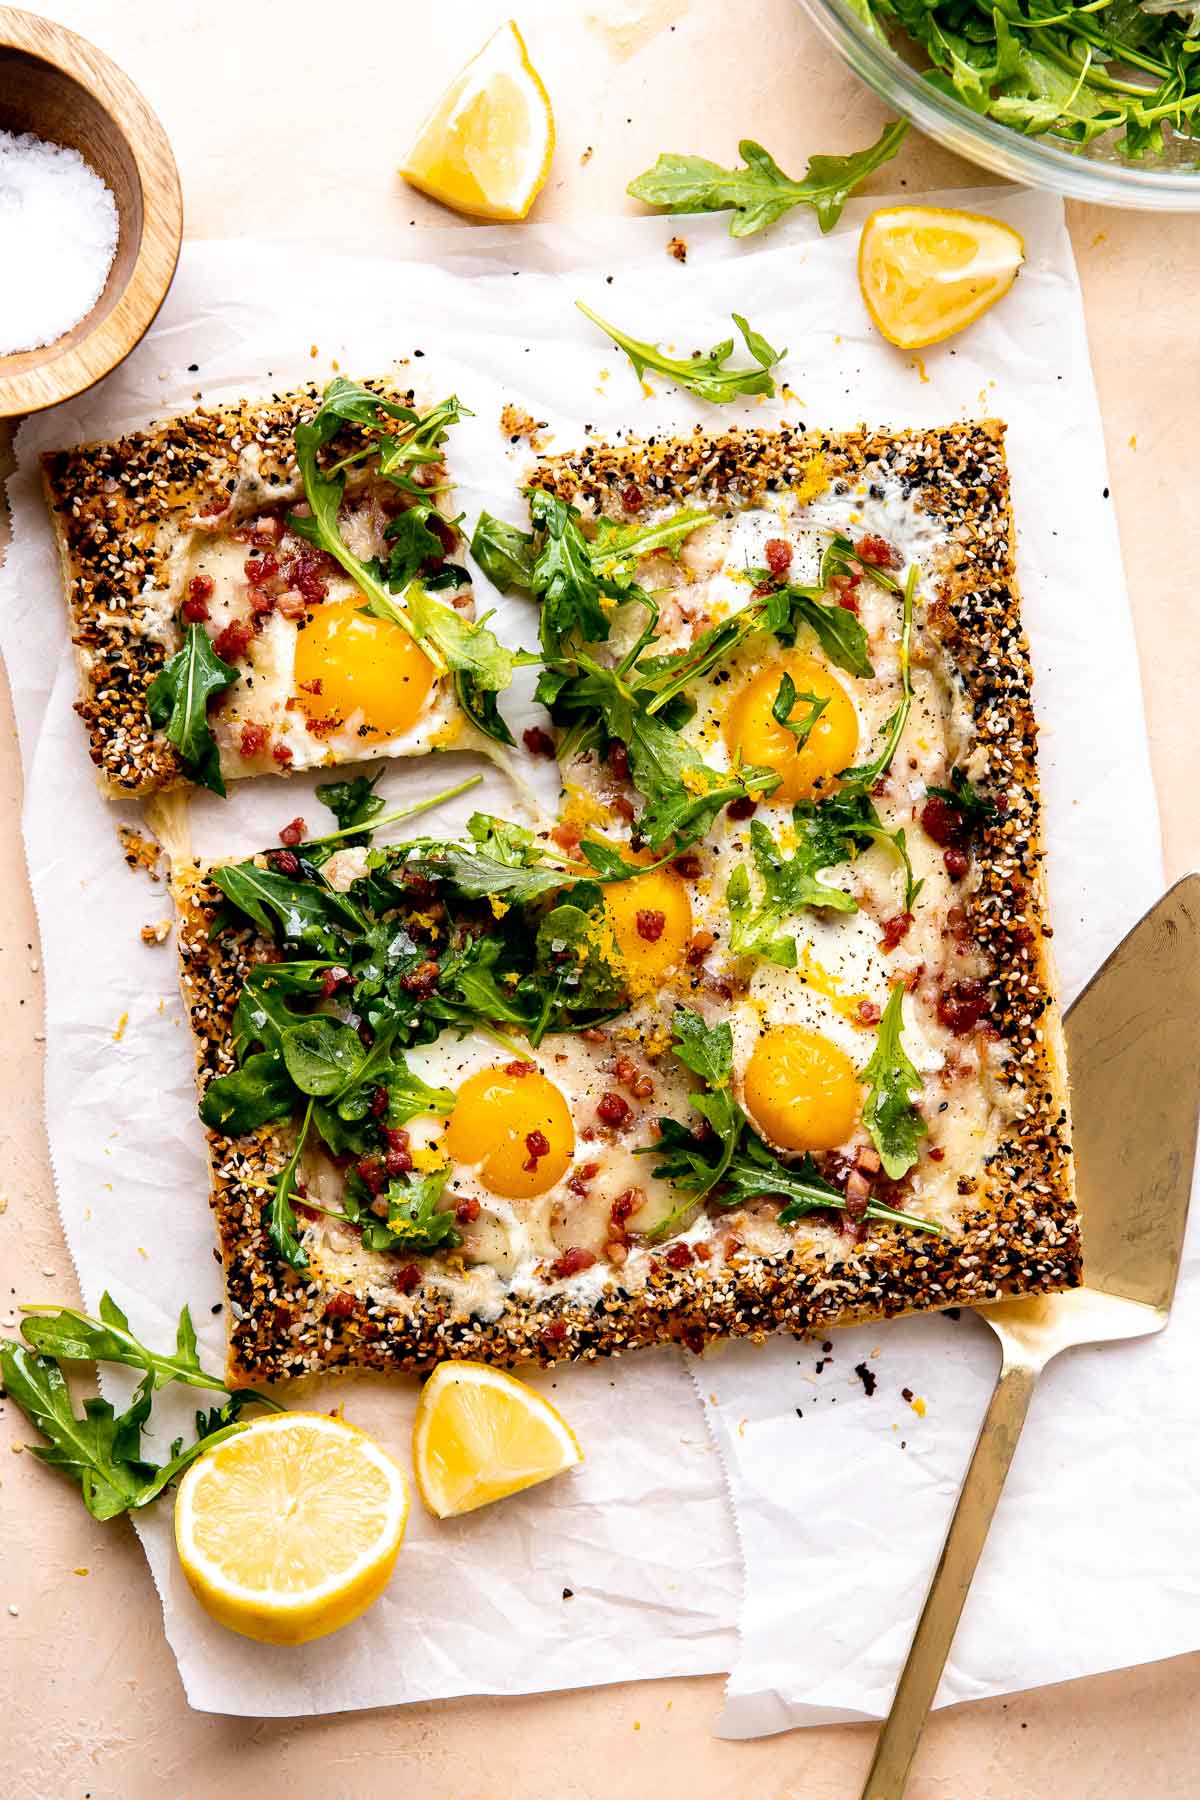 https://playswellwithbutter.com/wp-content/uploads/2022/04/Puff-Pastry-Breakfast-Pizza-with-Everything-Bagel-Crust-20.jpg